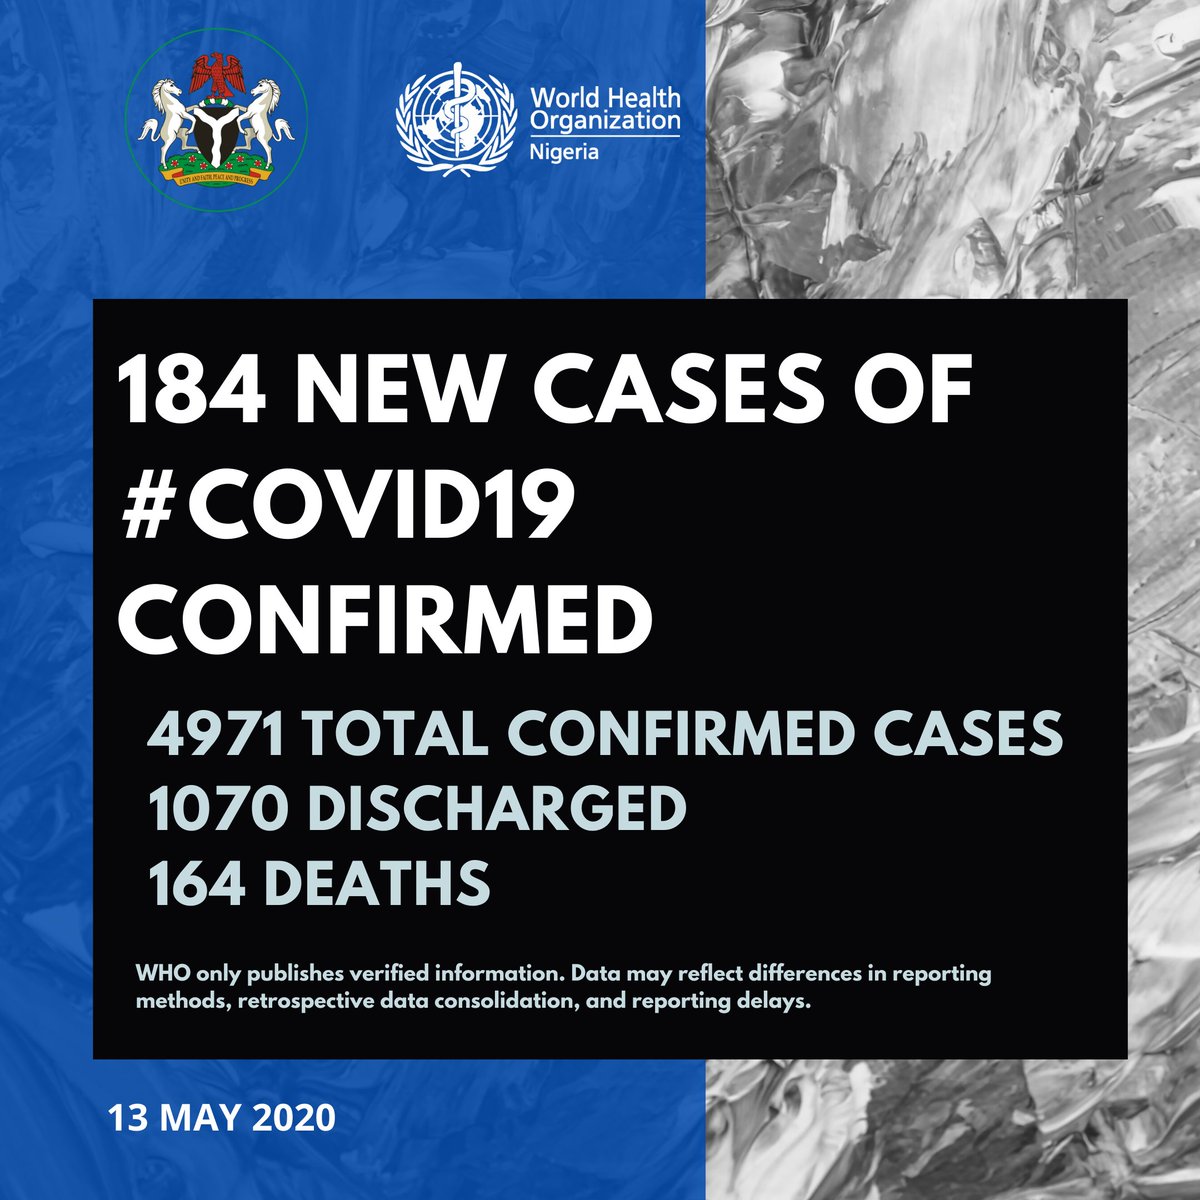 #COVID19Update, As at 13 May, 2020; 184 new cases of #COVID19 have been reported; Total confirmed cases: 4971 Discharged: 1070 Deaths: 164